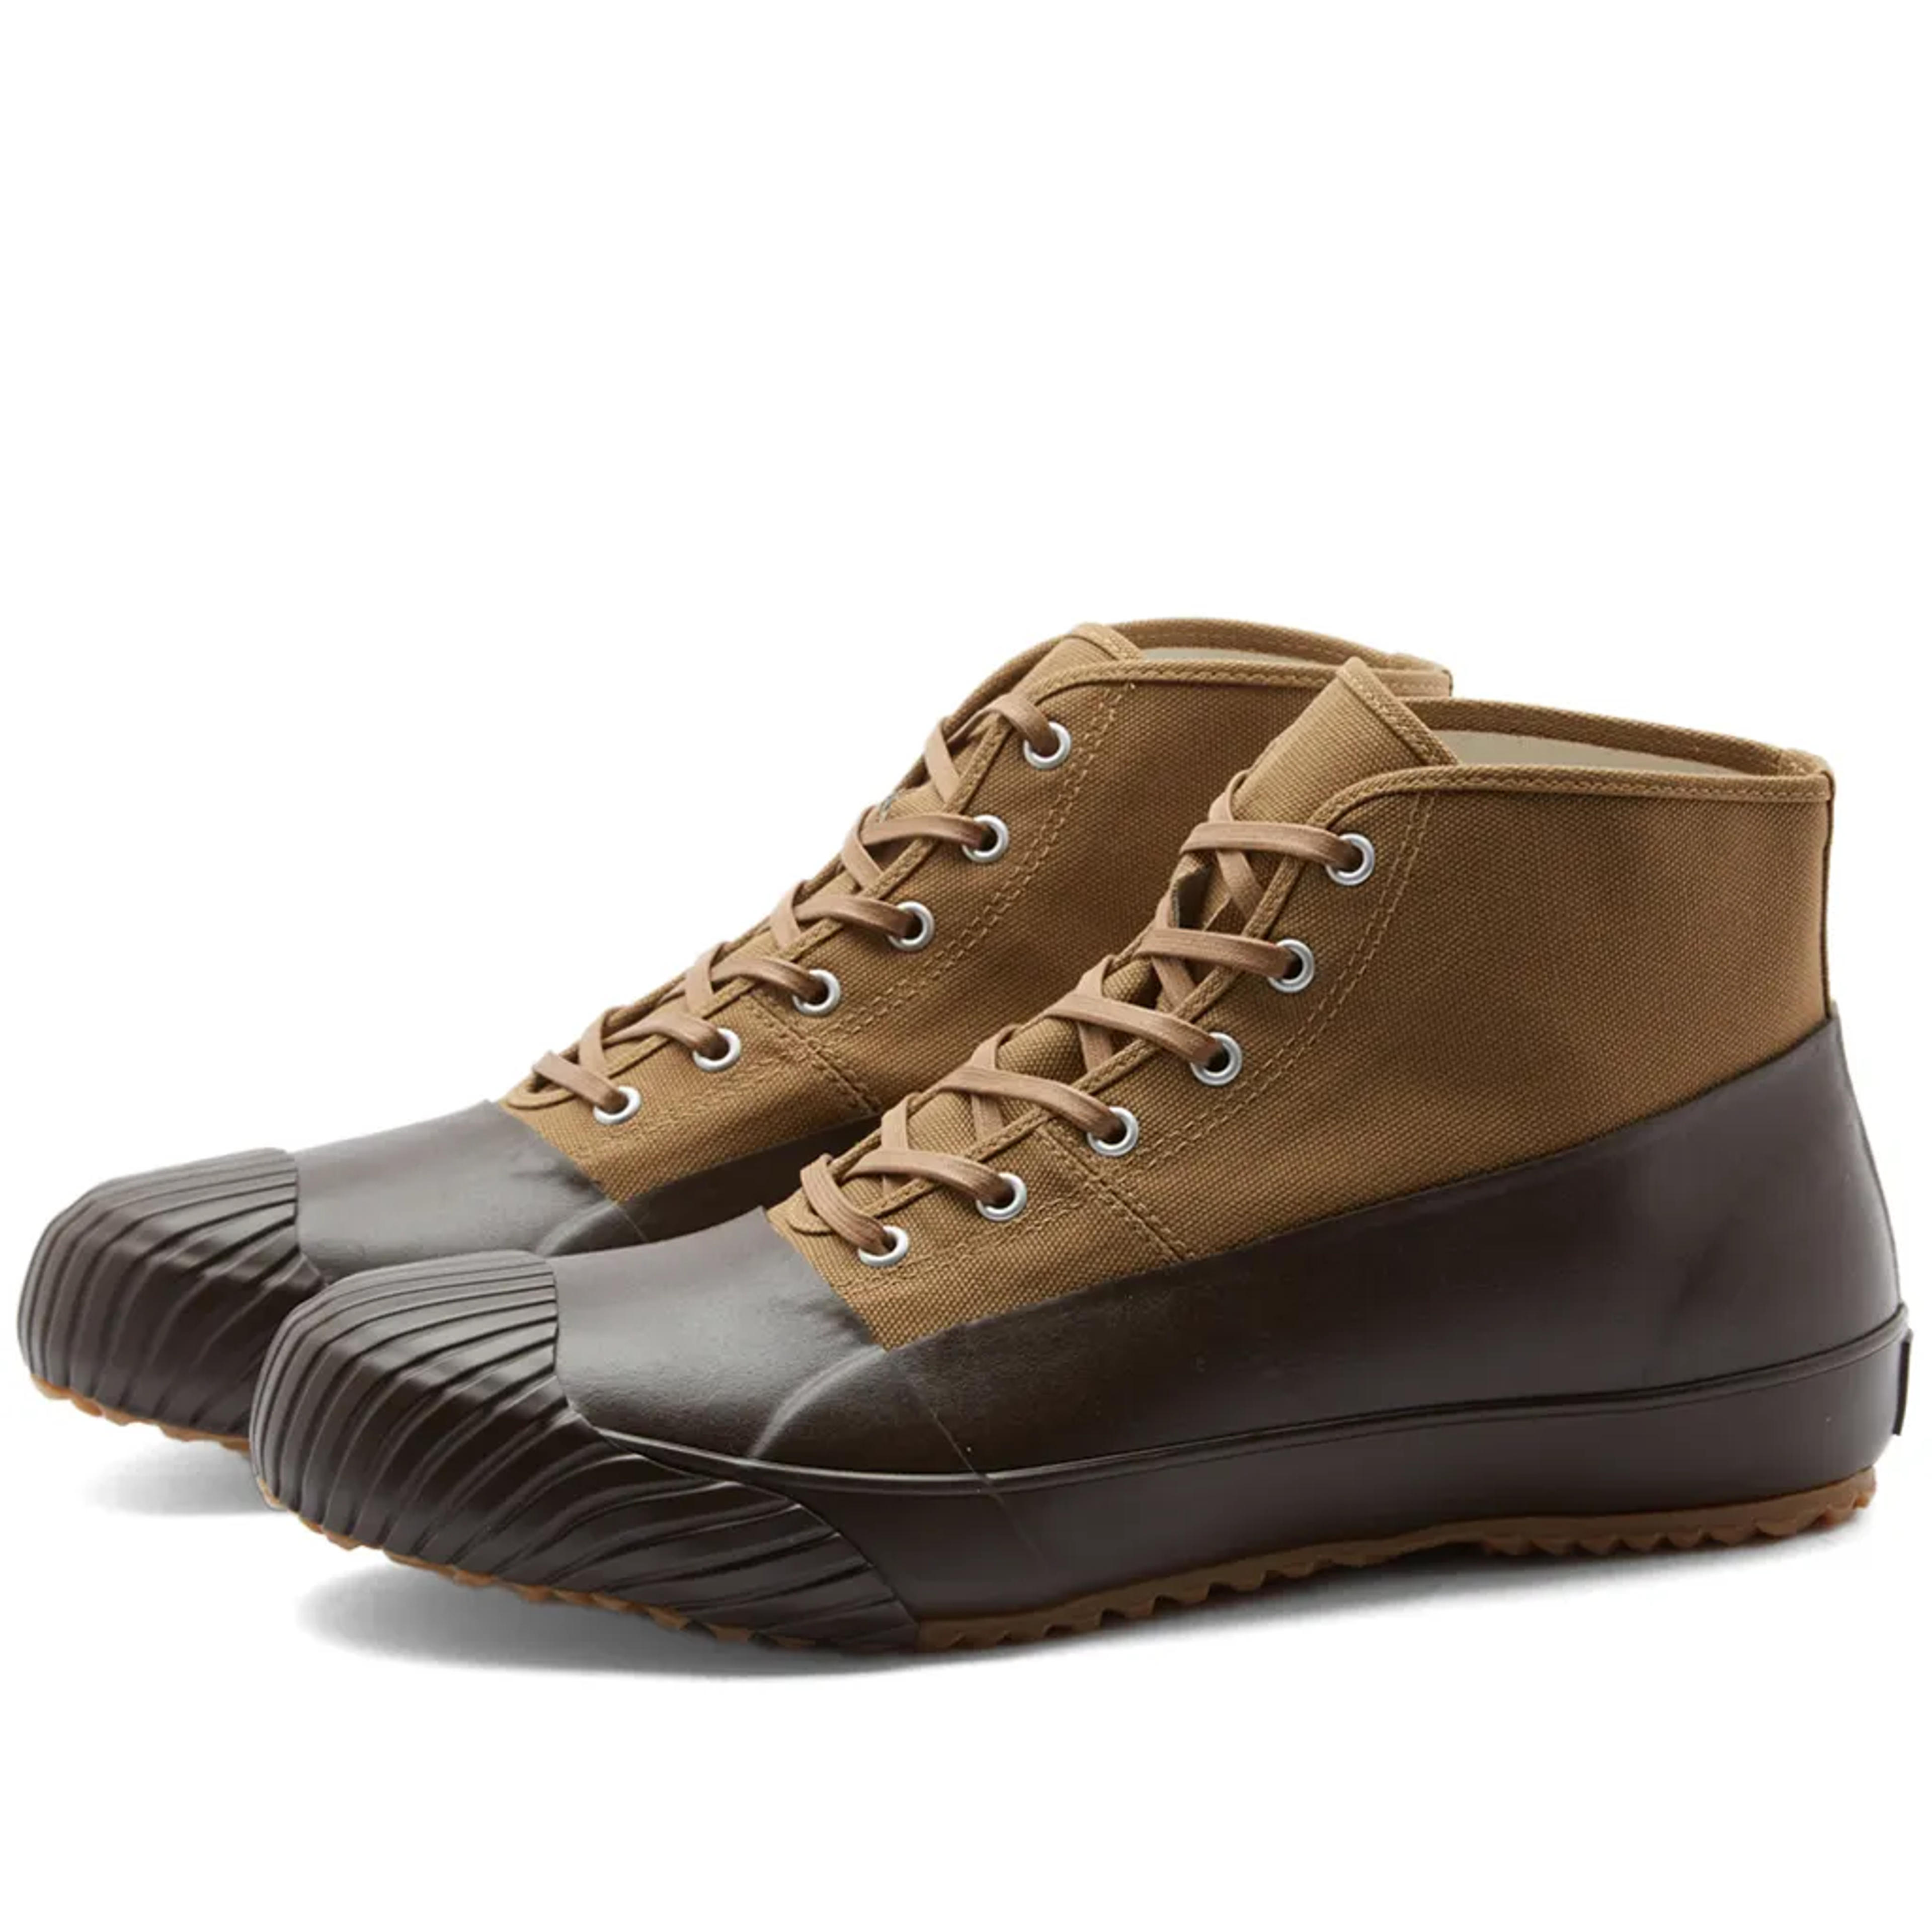 Moonstar All-Weather Shoe Brown | END. (UK)